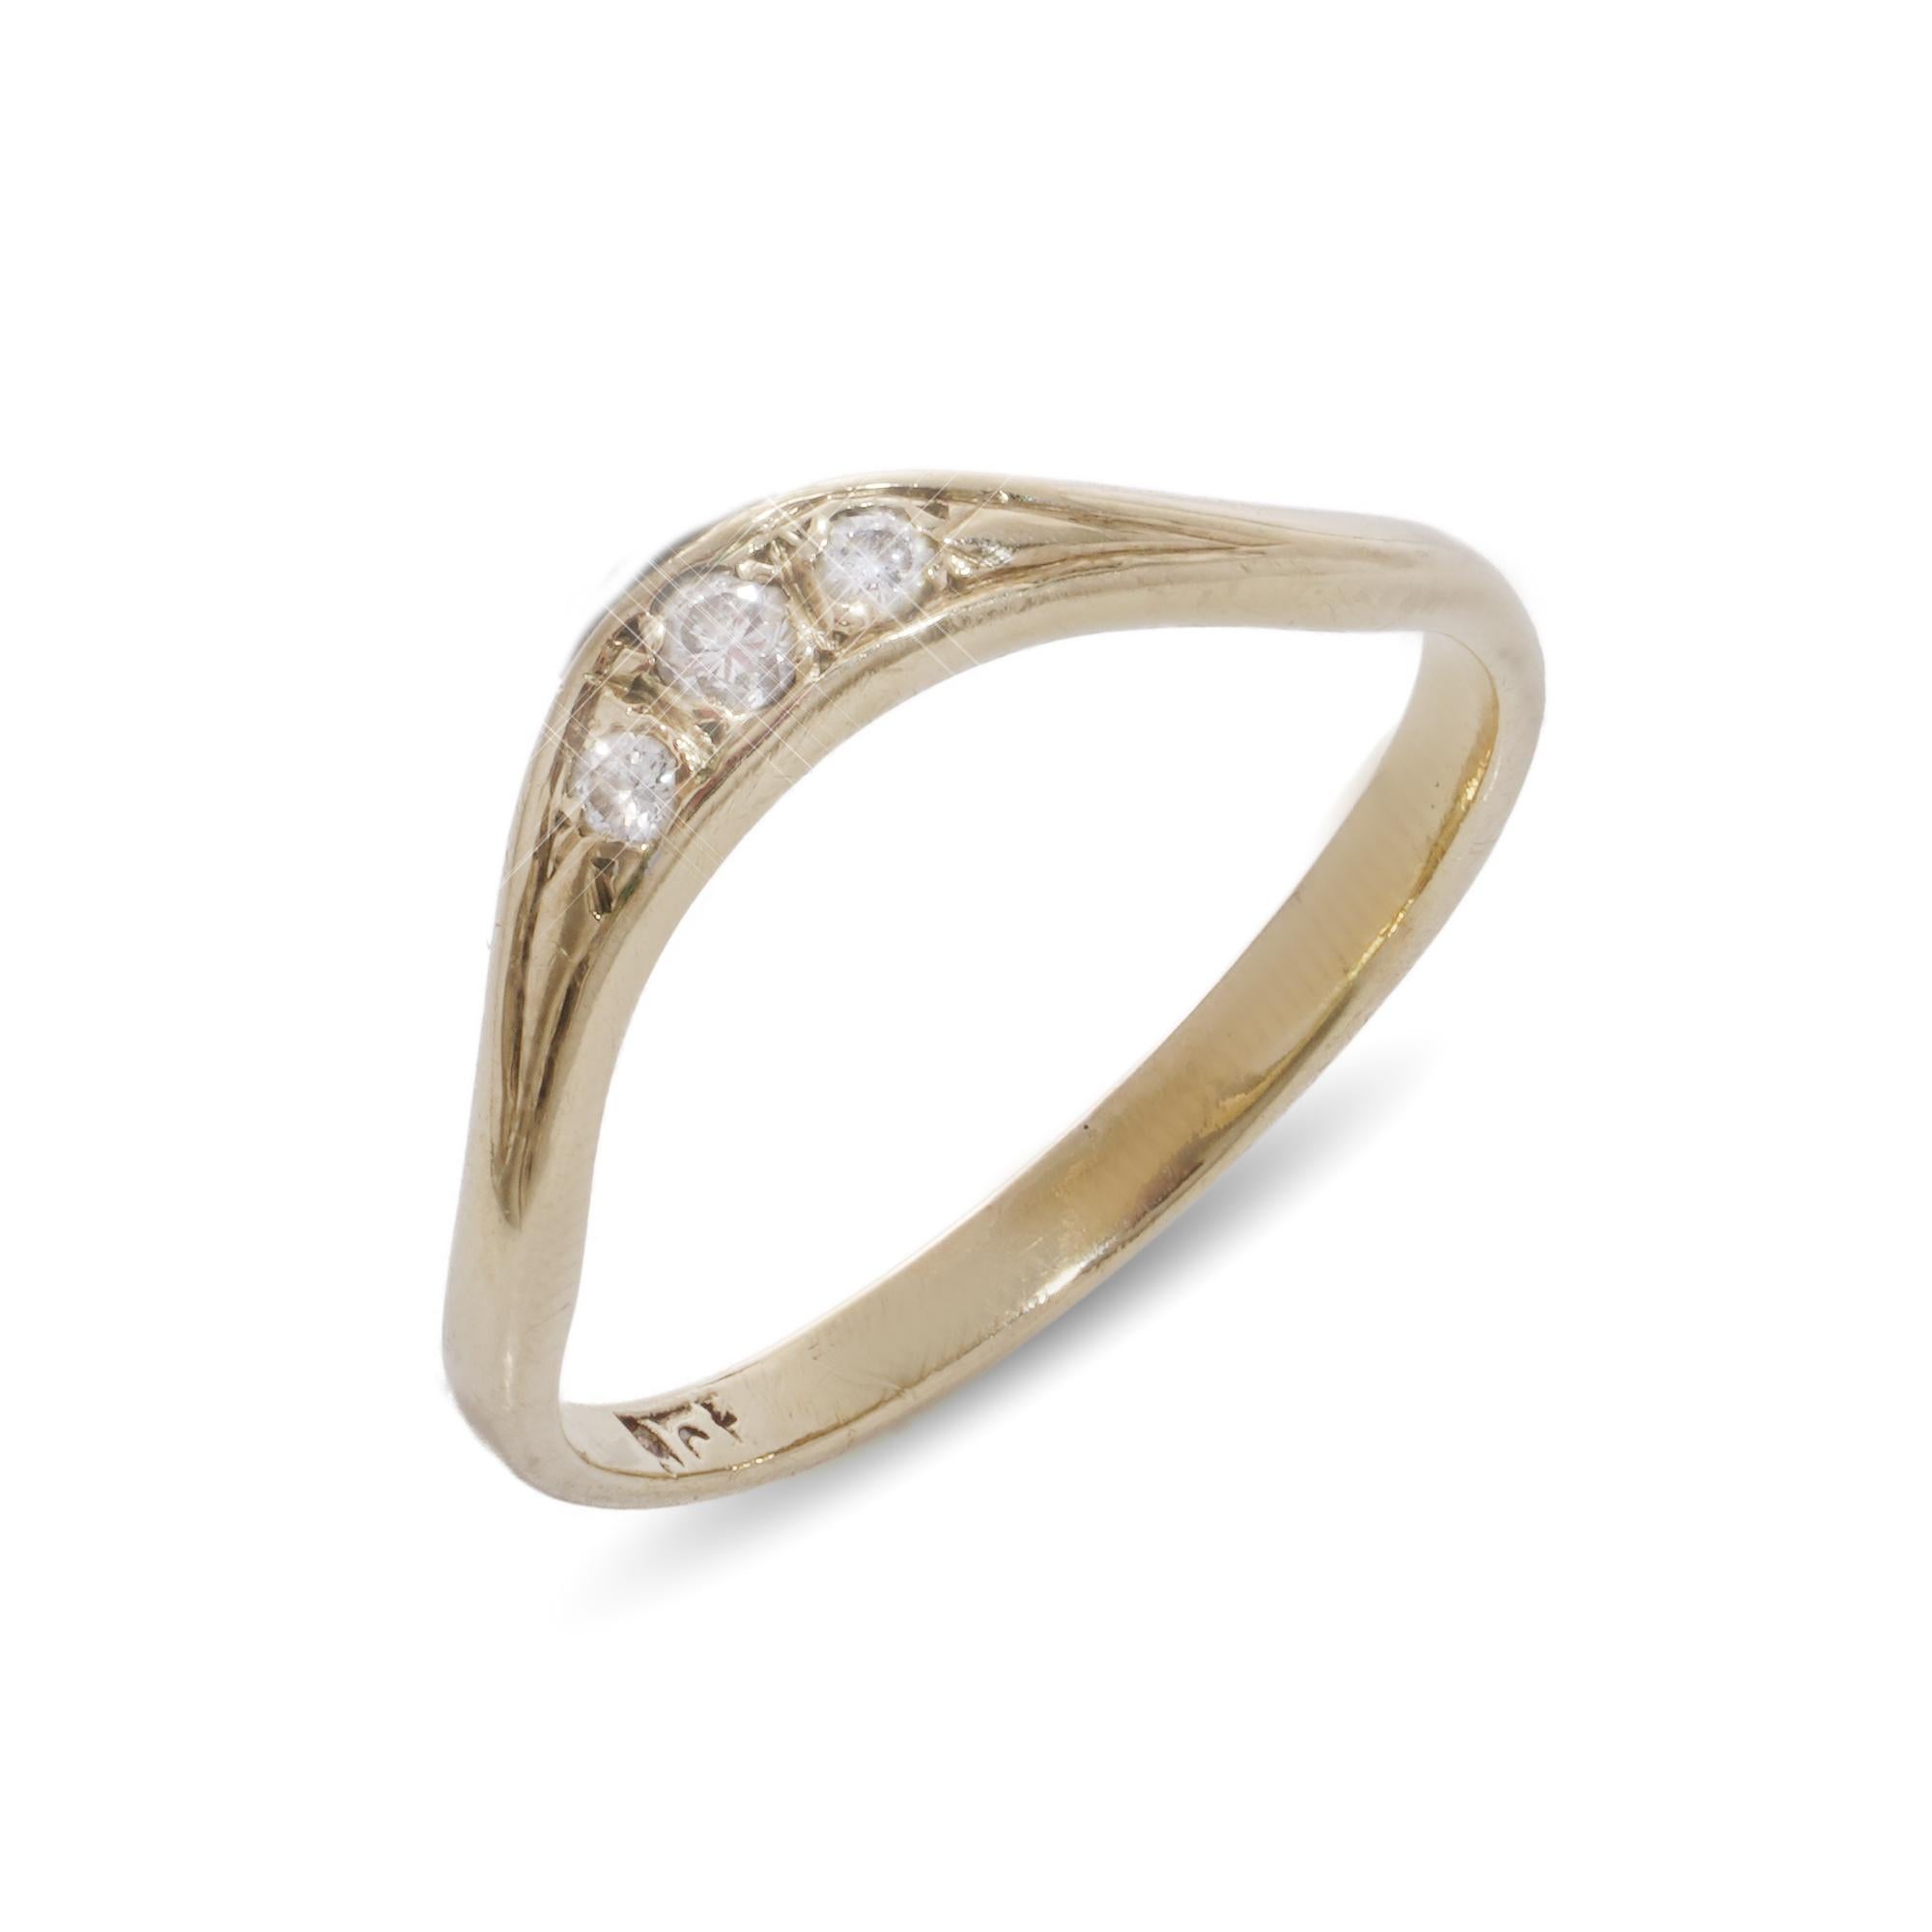 Vintage 9kt yellow gold three-stone diamond ring.
X-ray tested positive for 18kt gold.

Dimensions -
Finger Size (UK) = K (EU) = 52 (US) = 5.5
Weight: 1.00 gram

Diamond -
Cut: Round brilliant
Quantity of stones: 3
Carat weight: 0.07 carats in